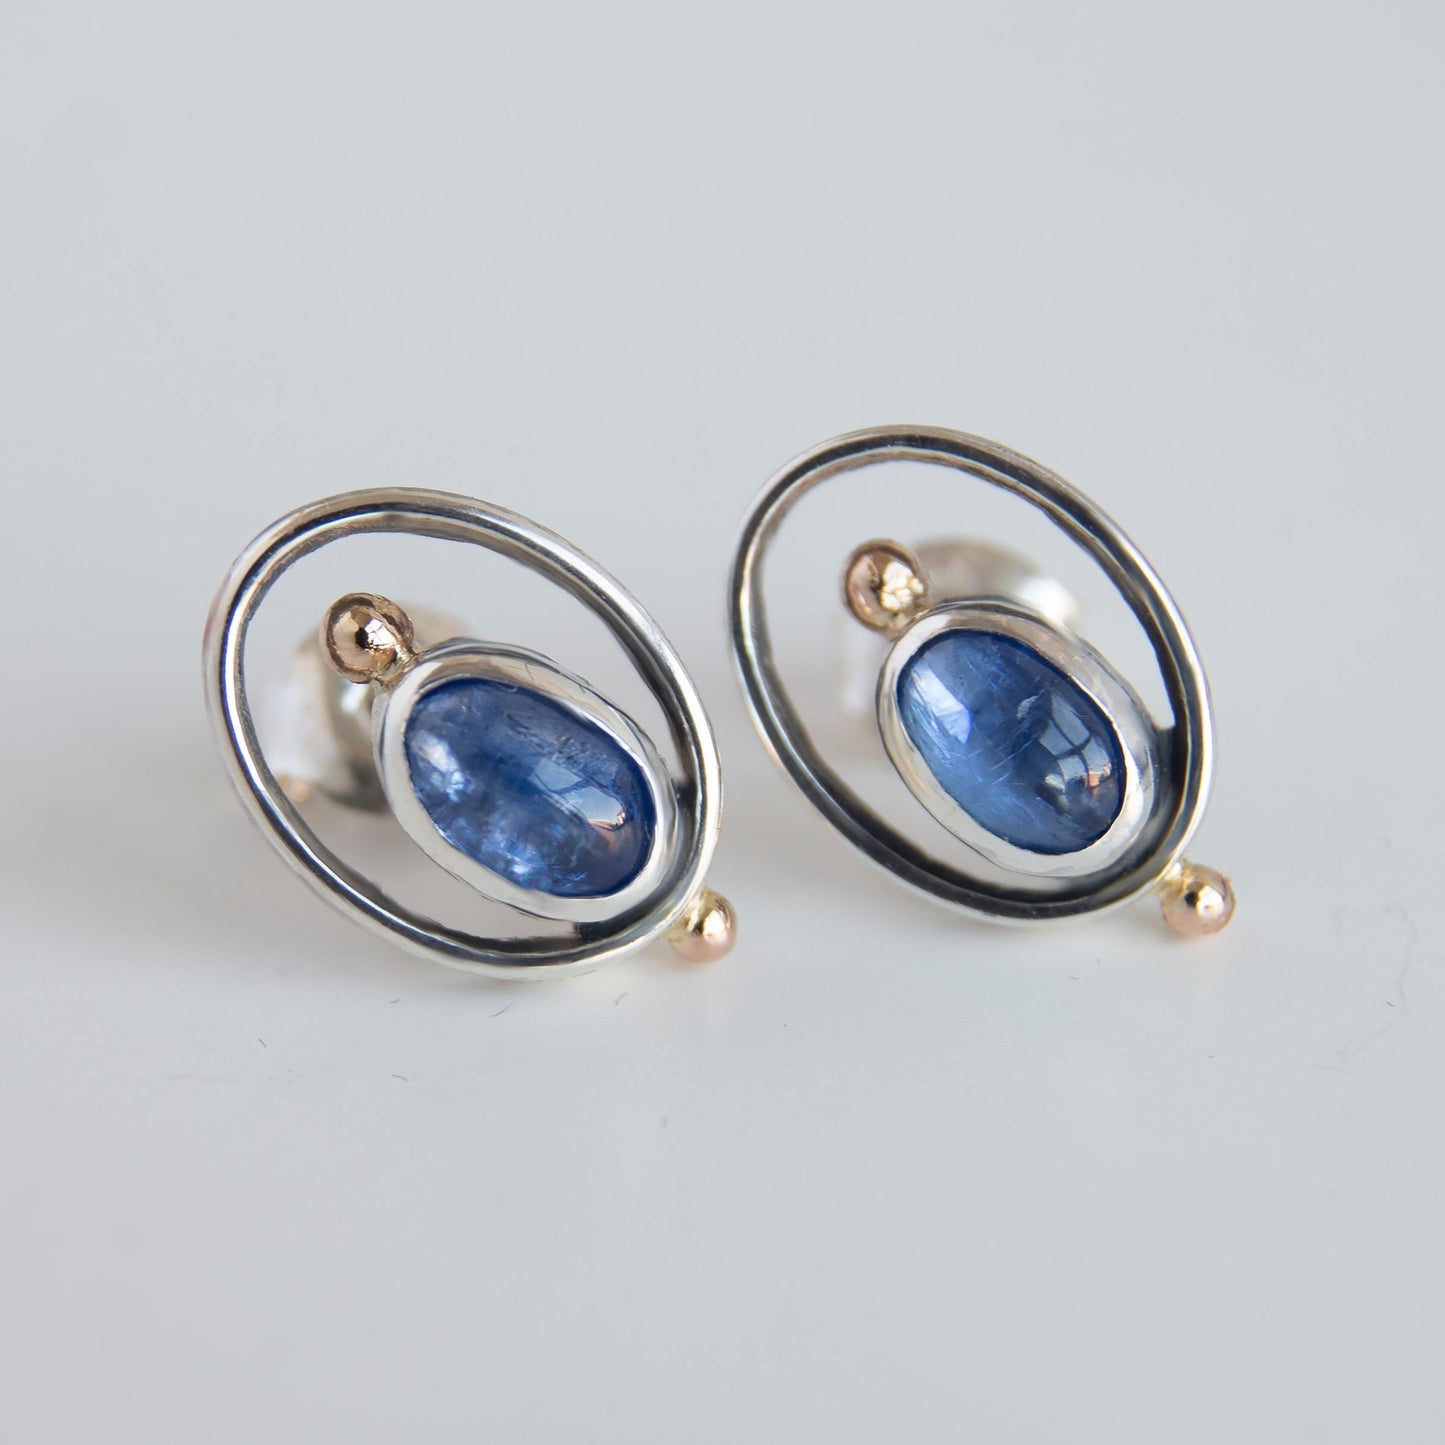 Kyanite Stone, Minimalistic Earrings With 14k Gold Beads ,,frame''